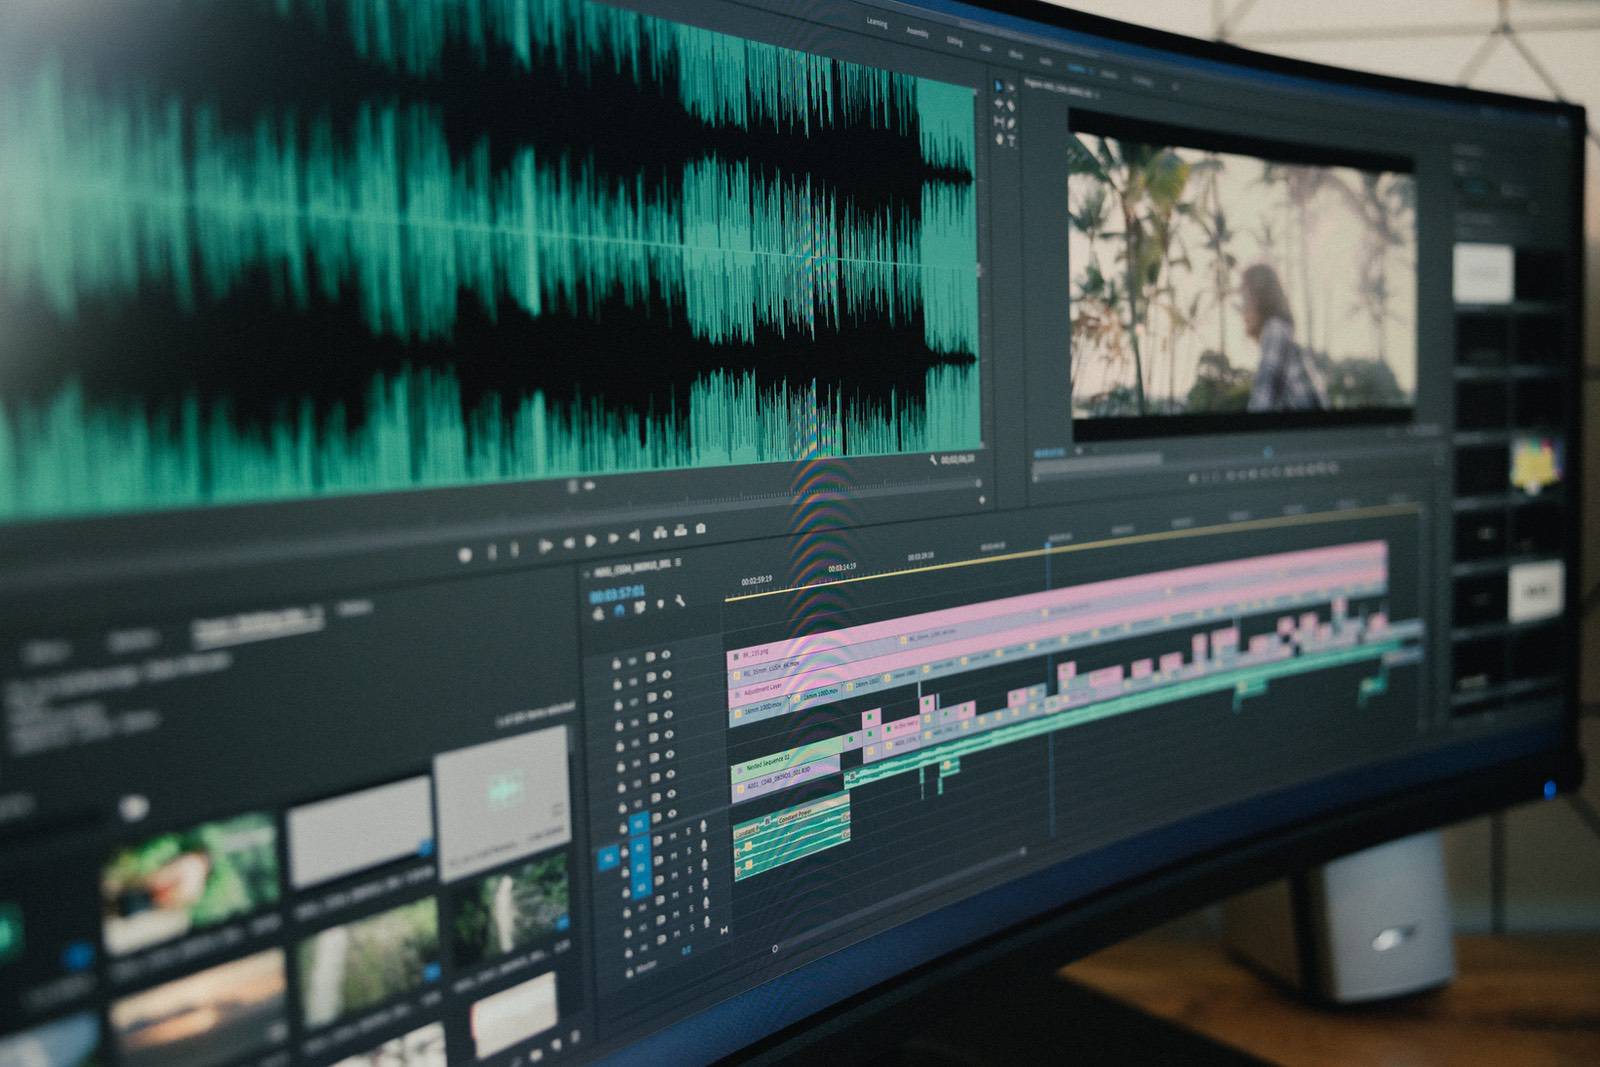 How to Compress a Video: A Quick Guide to Help You Make Video Files Smaller